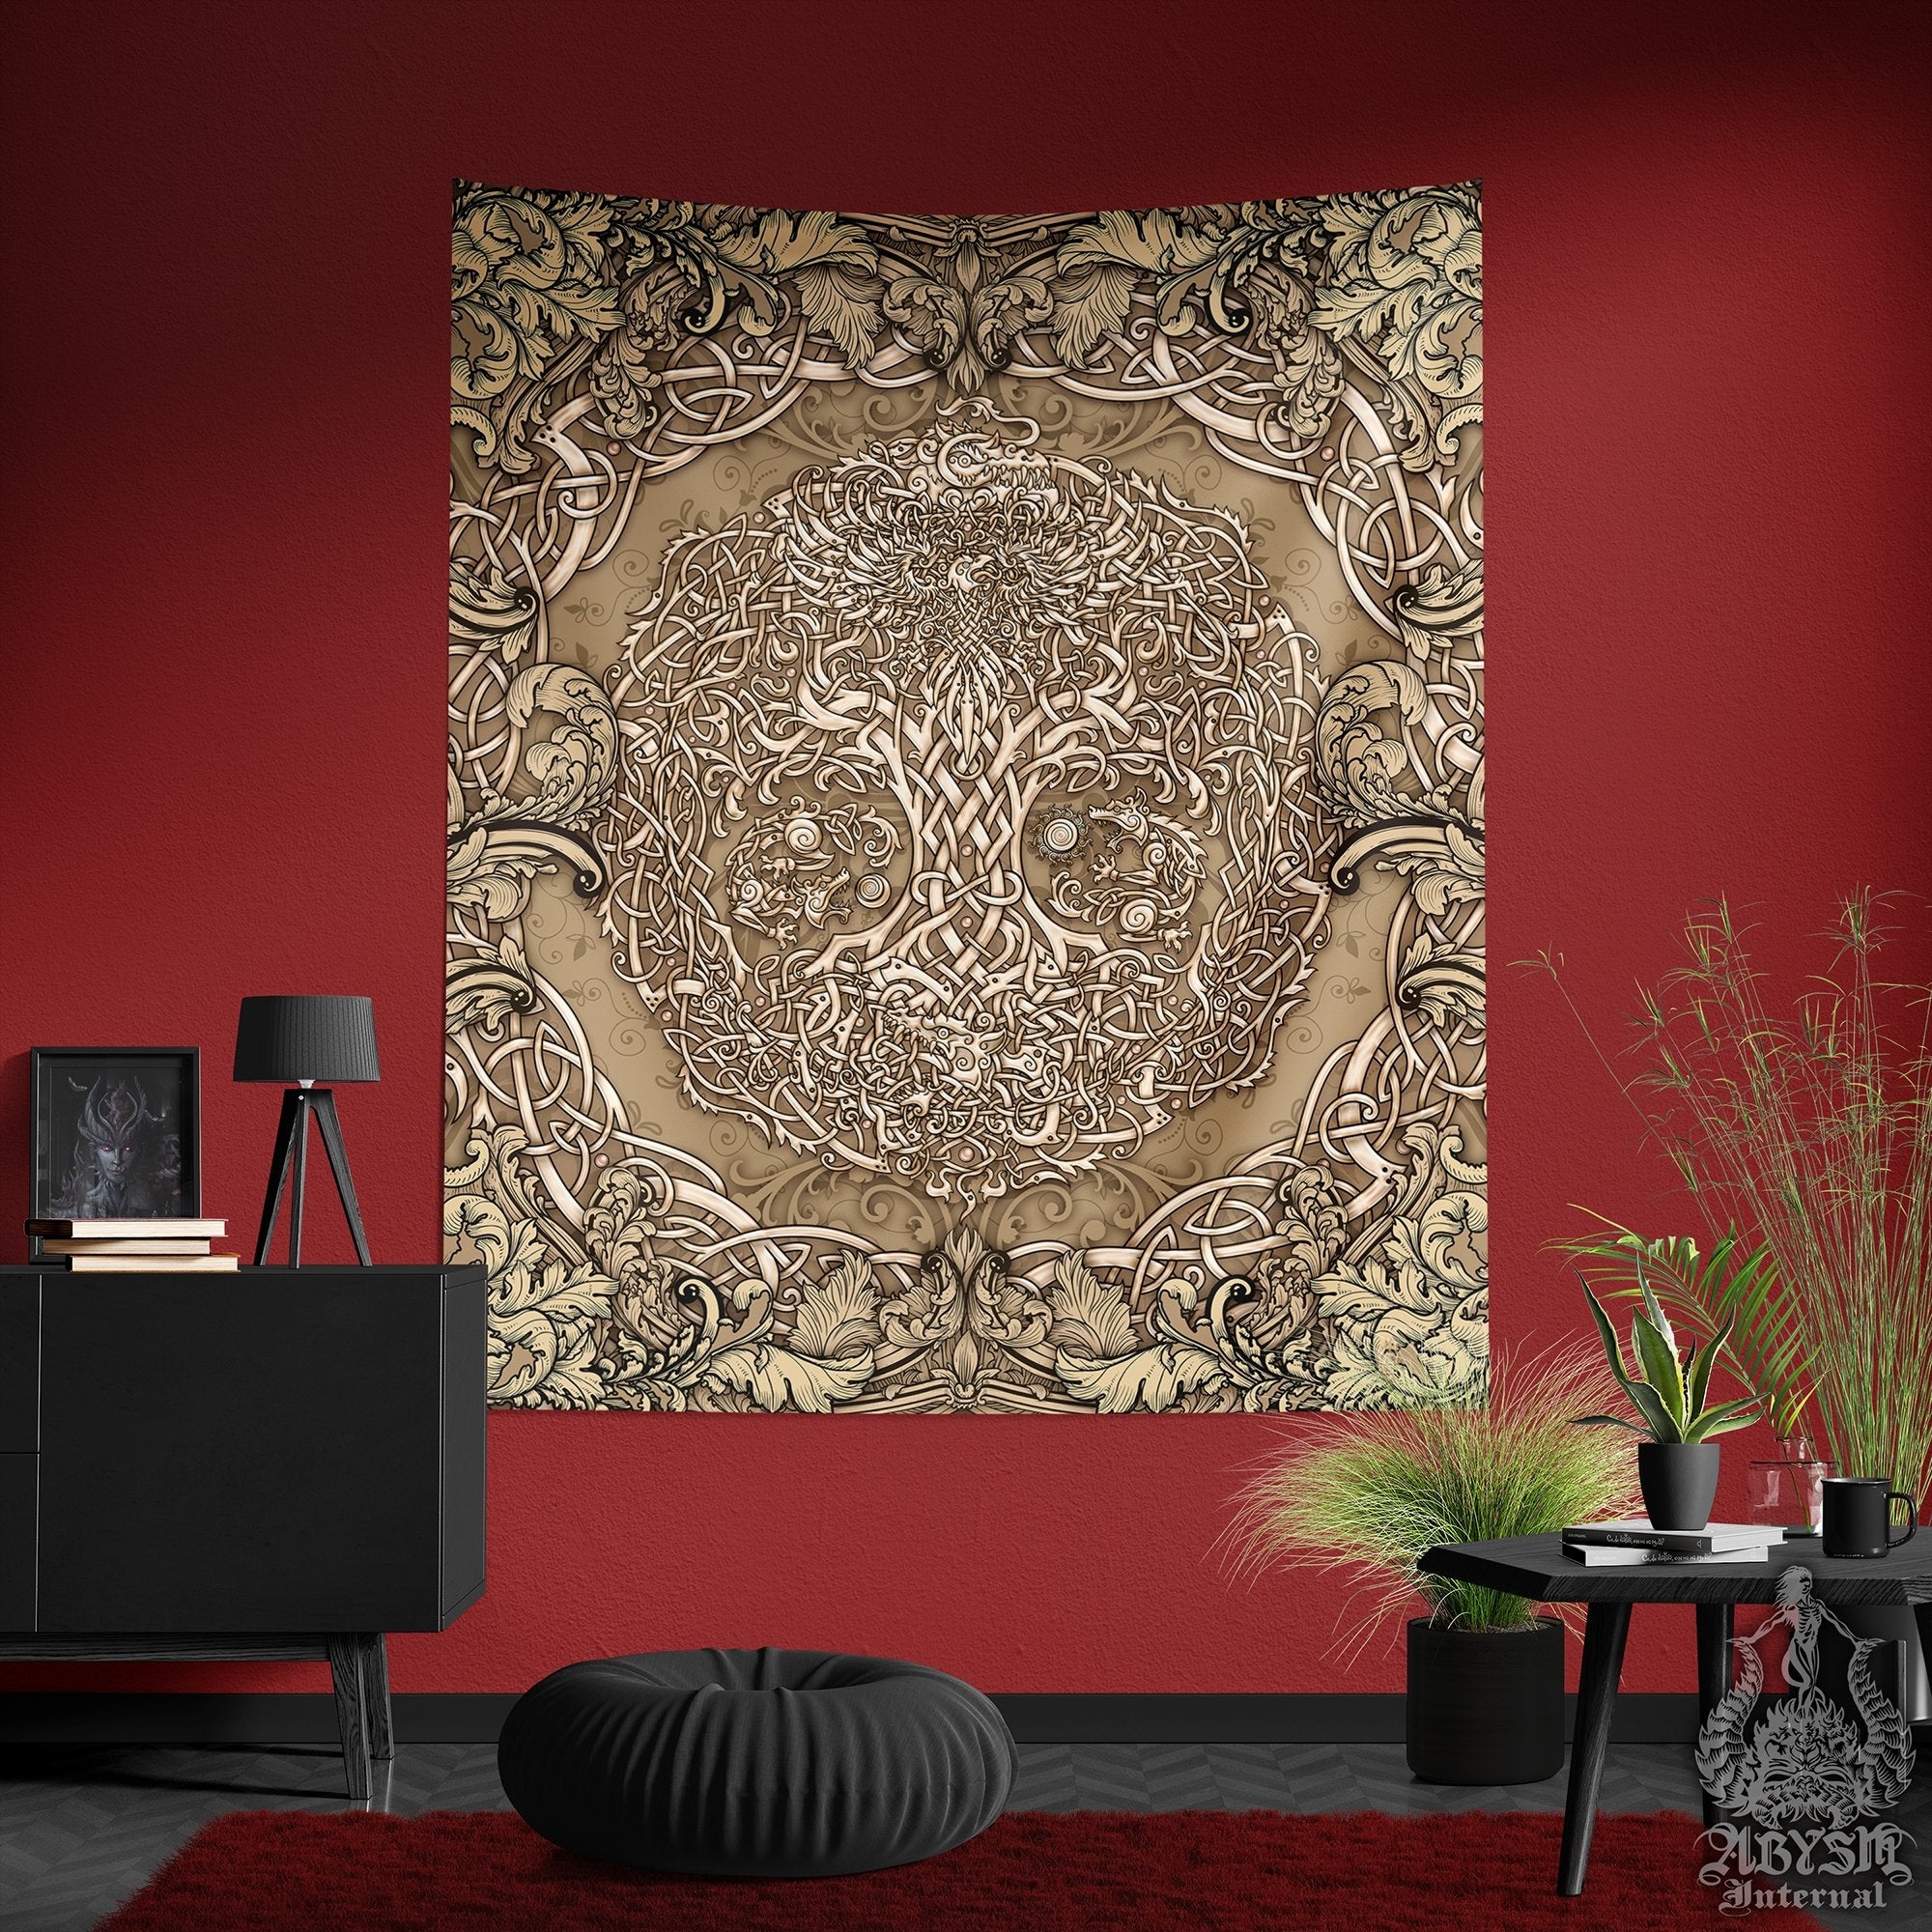 Yggdrasil Tapestry, Norse Wall Hanging, Viking Home Decor, Pagan Art Print, Nordic Tree of Life, Eclectic and Funky - Cream - Abysm Internal